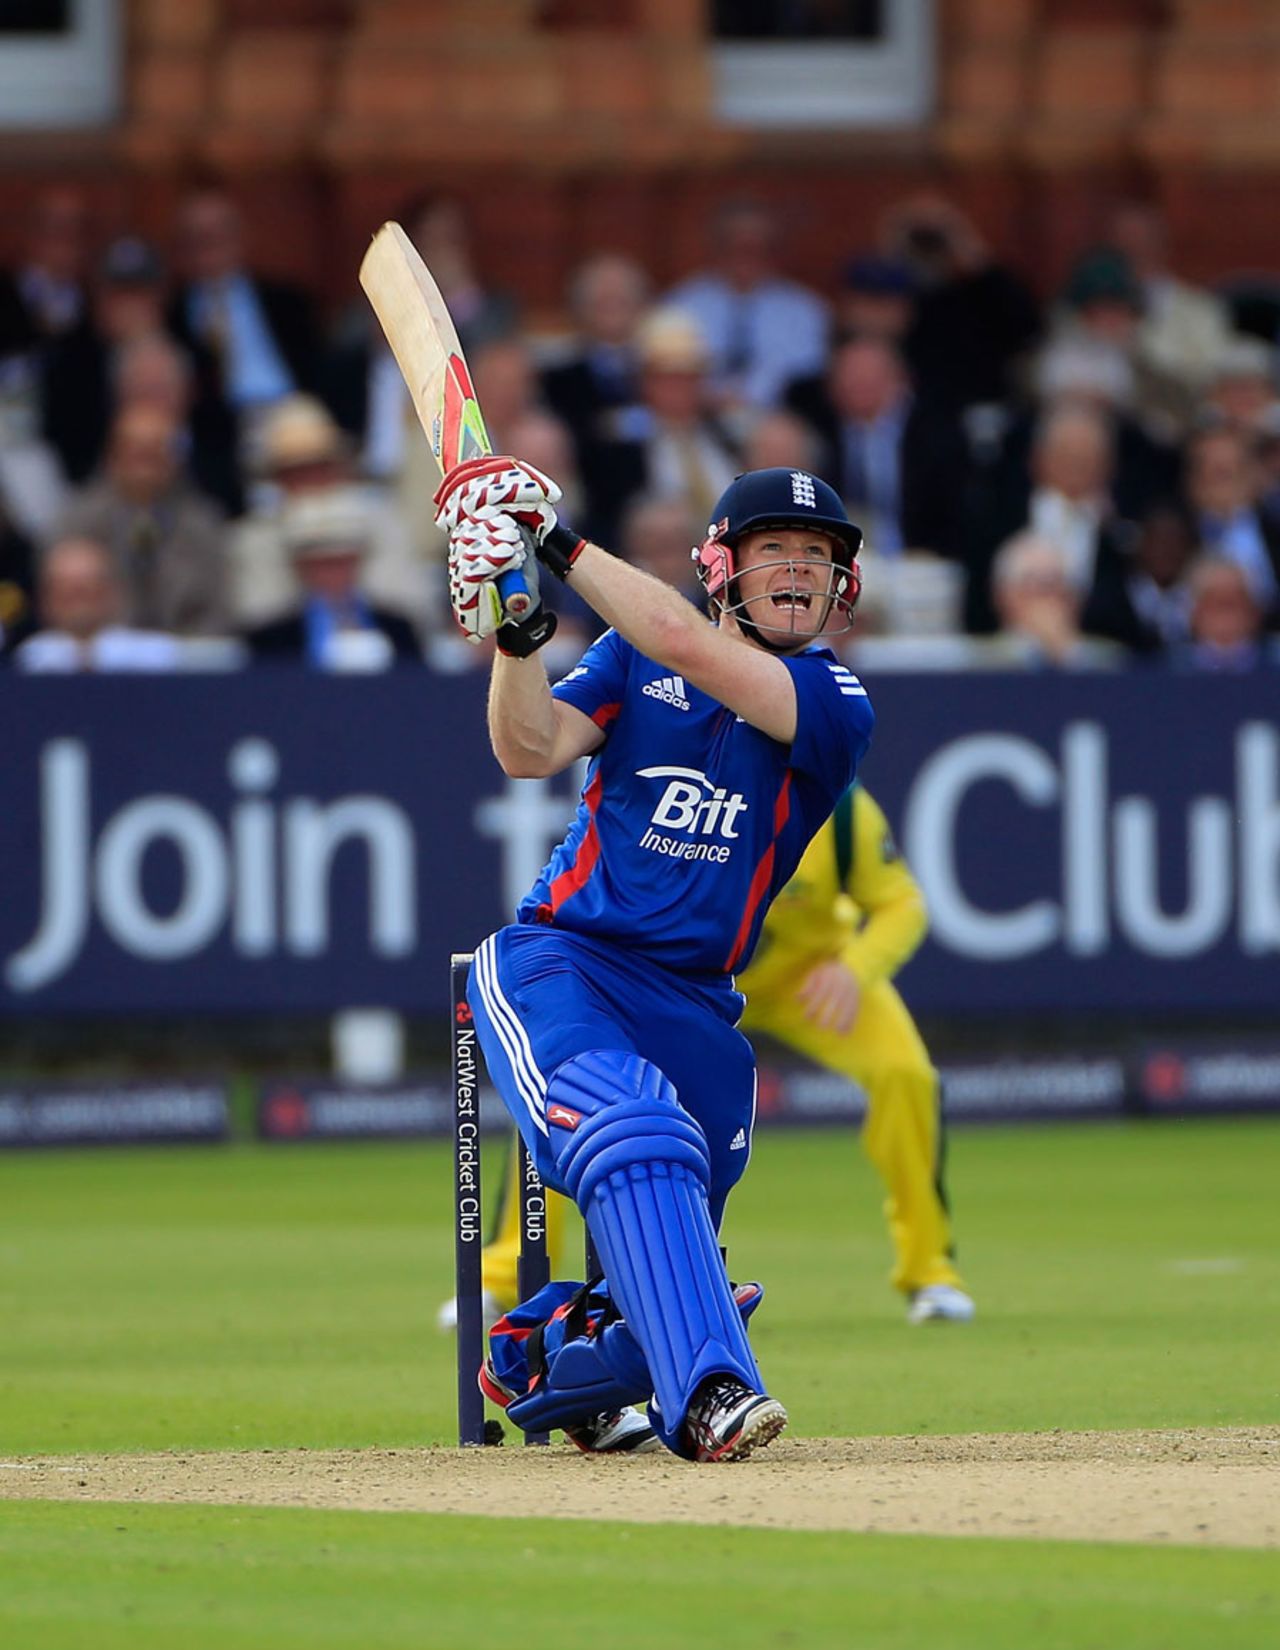 Eoin Morgan lifts a six down the ground, England v Australia, 1st ODI, Lord's, June 29, 2012